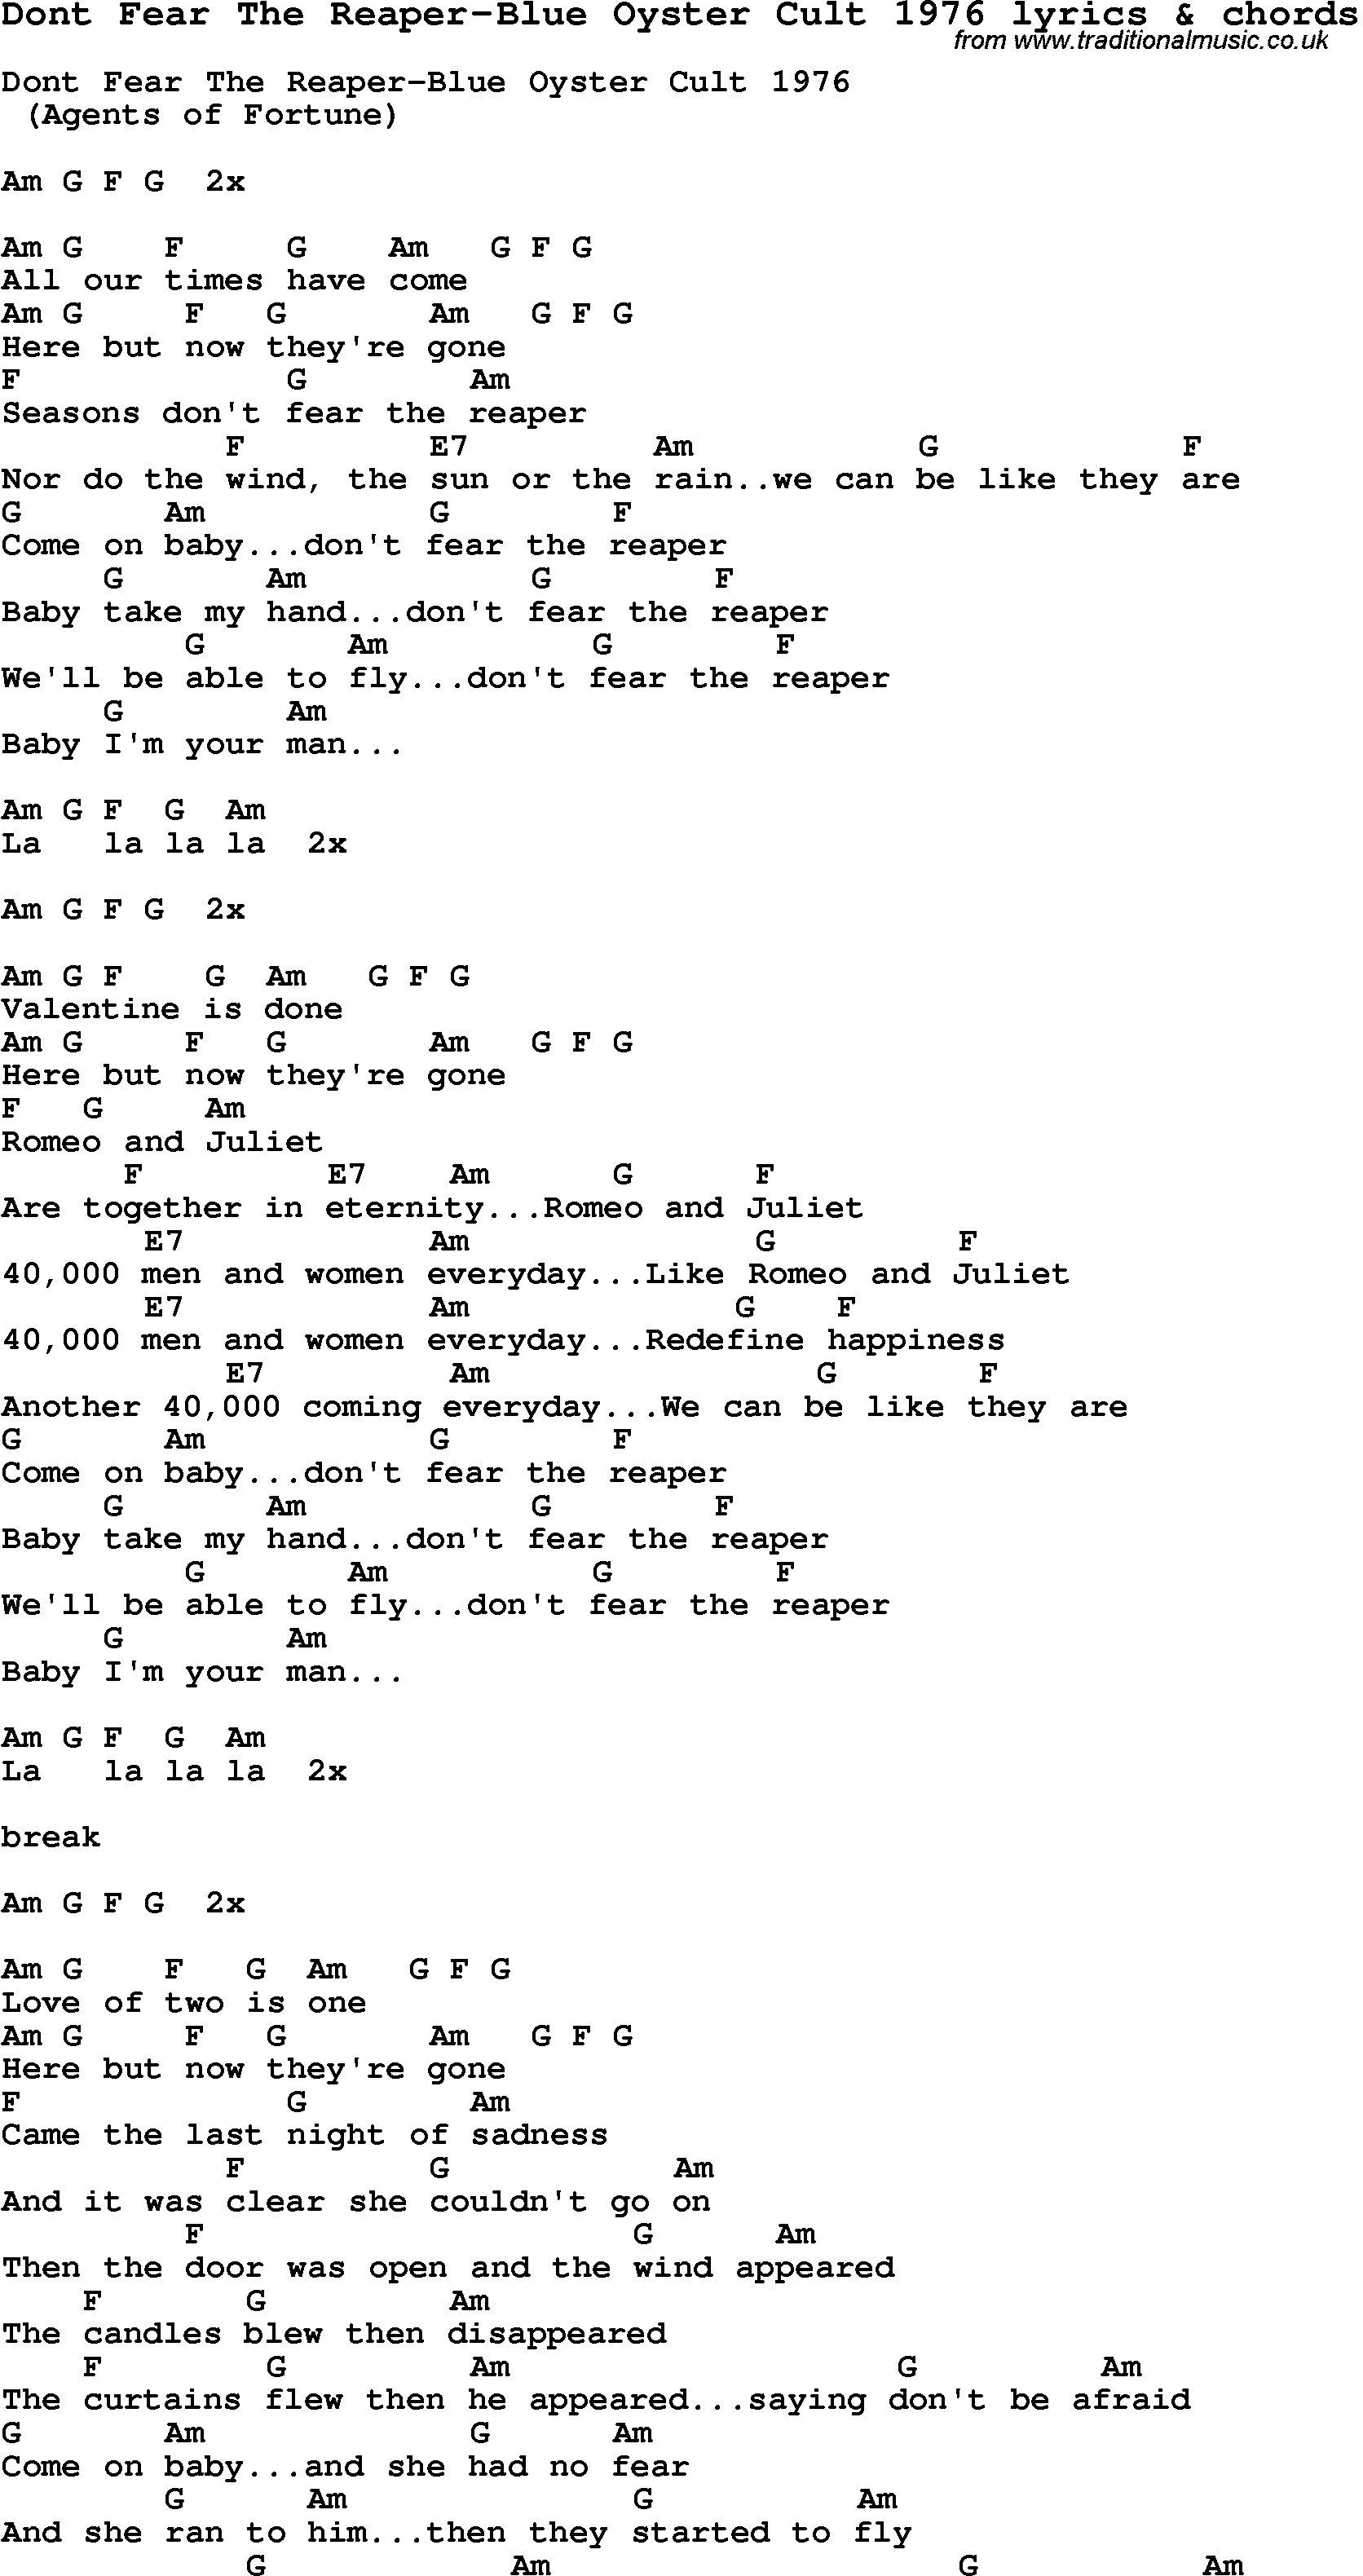 Love Song Lyrics for: Dont Fear The Reaper-Blue Oyster Cult 1976 with chords for Ukulele, Guitar Banjo etc.